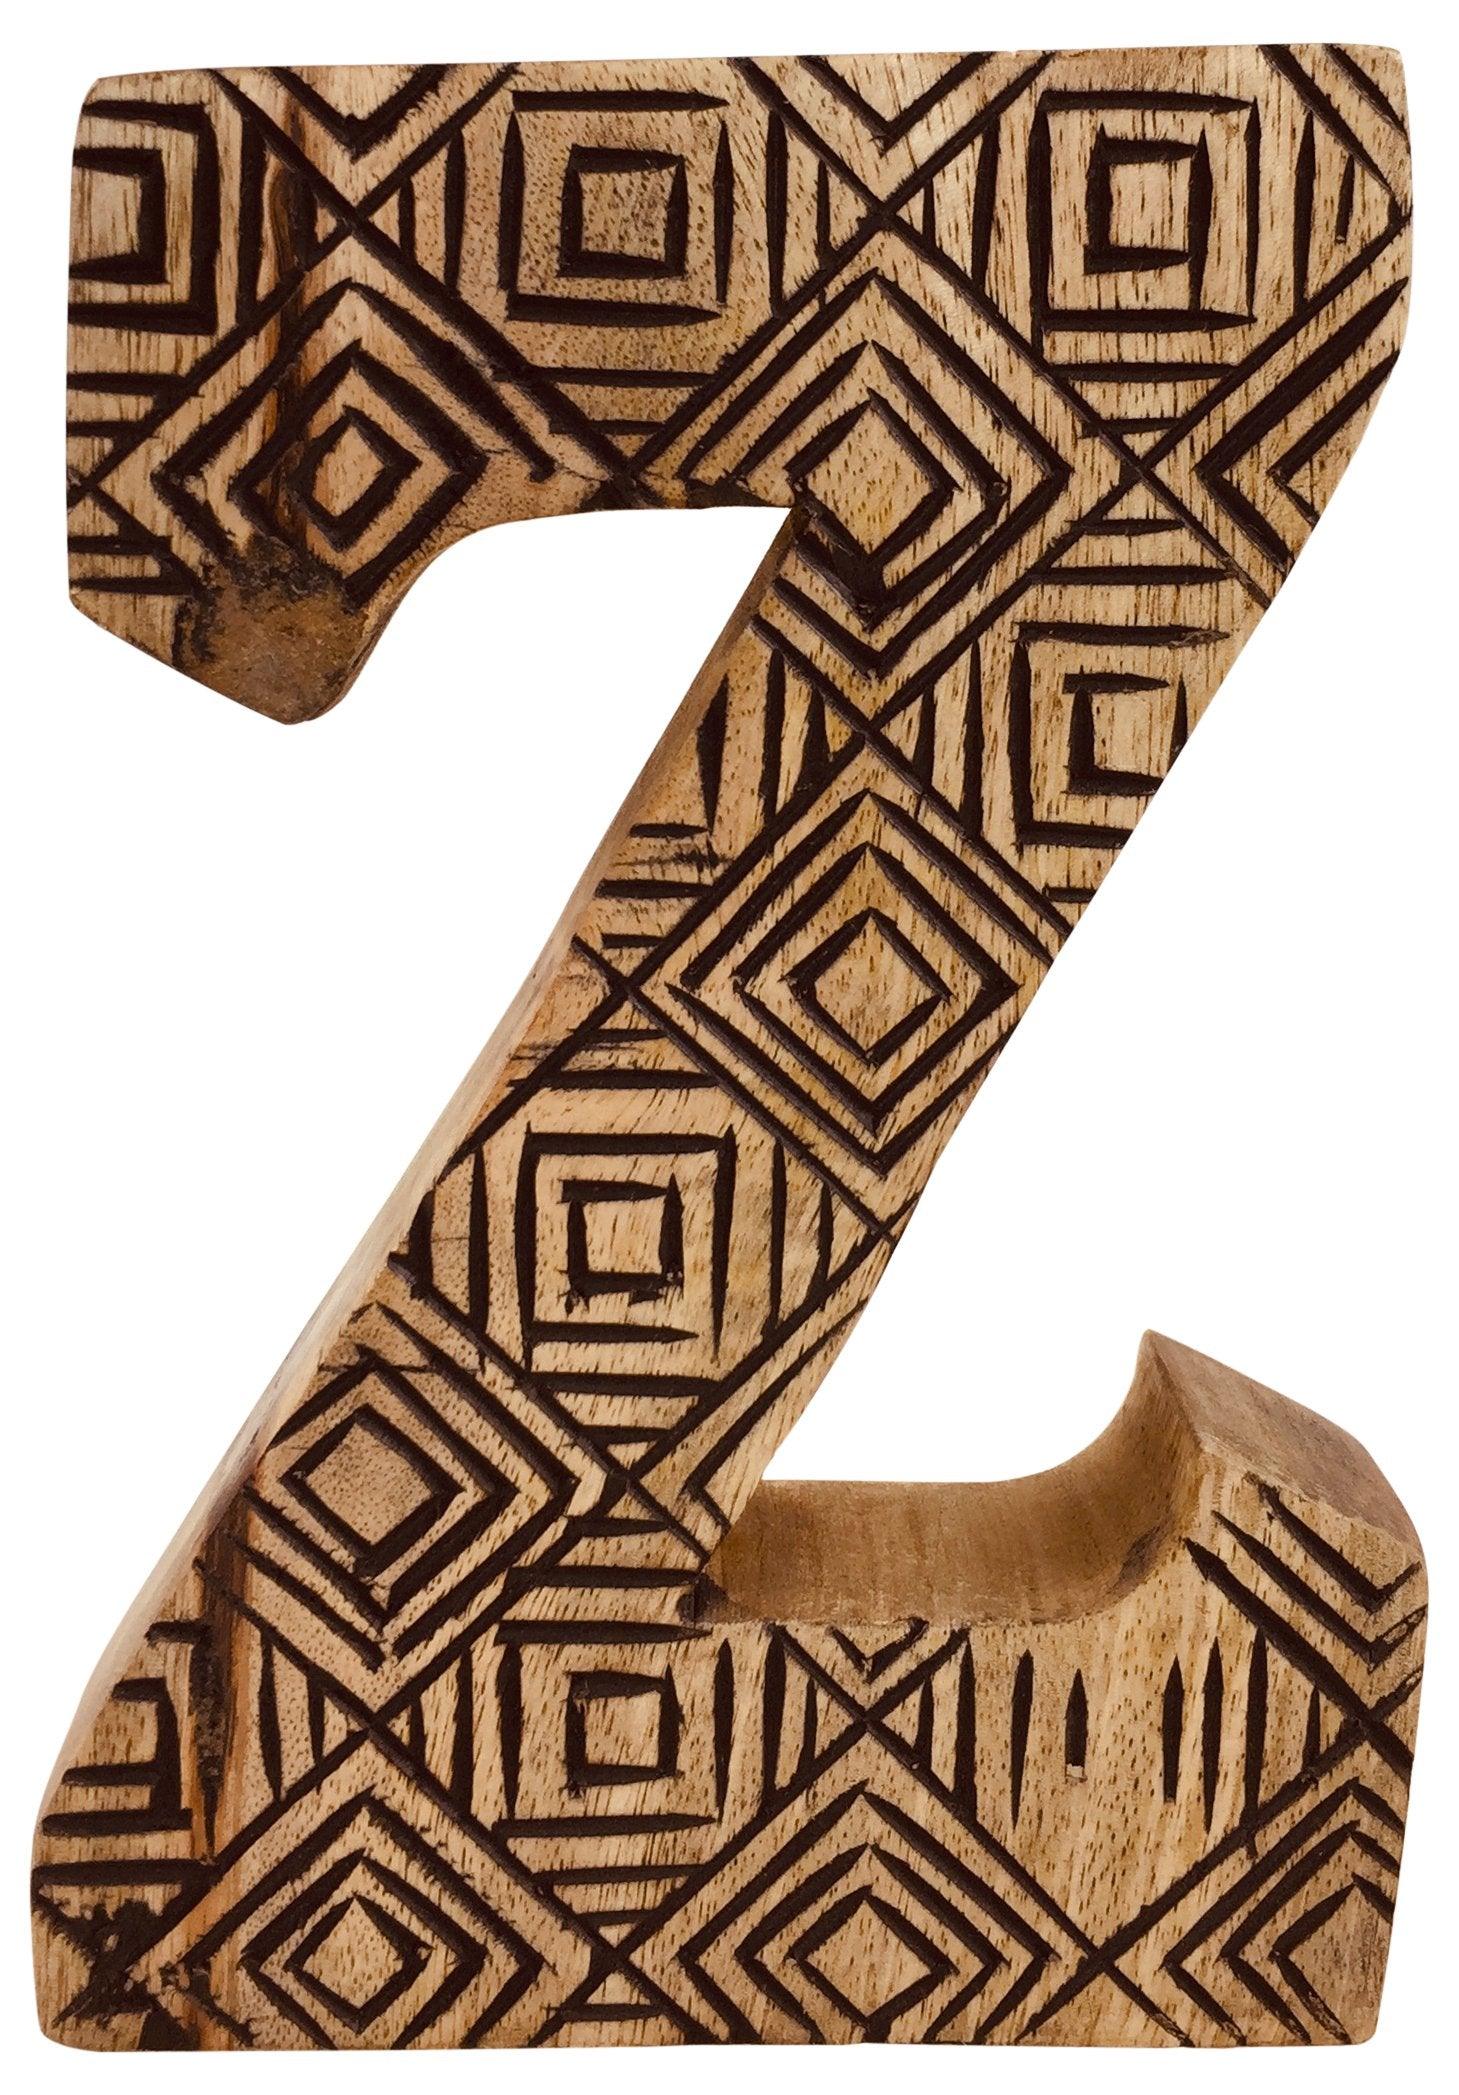 Hand Carved Wooden Geometric Letter Z-Single Letters